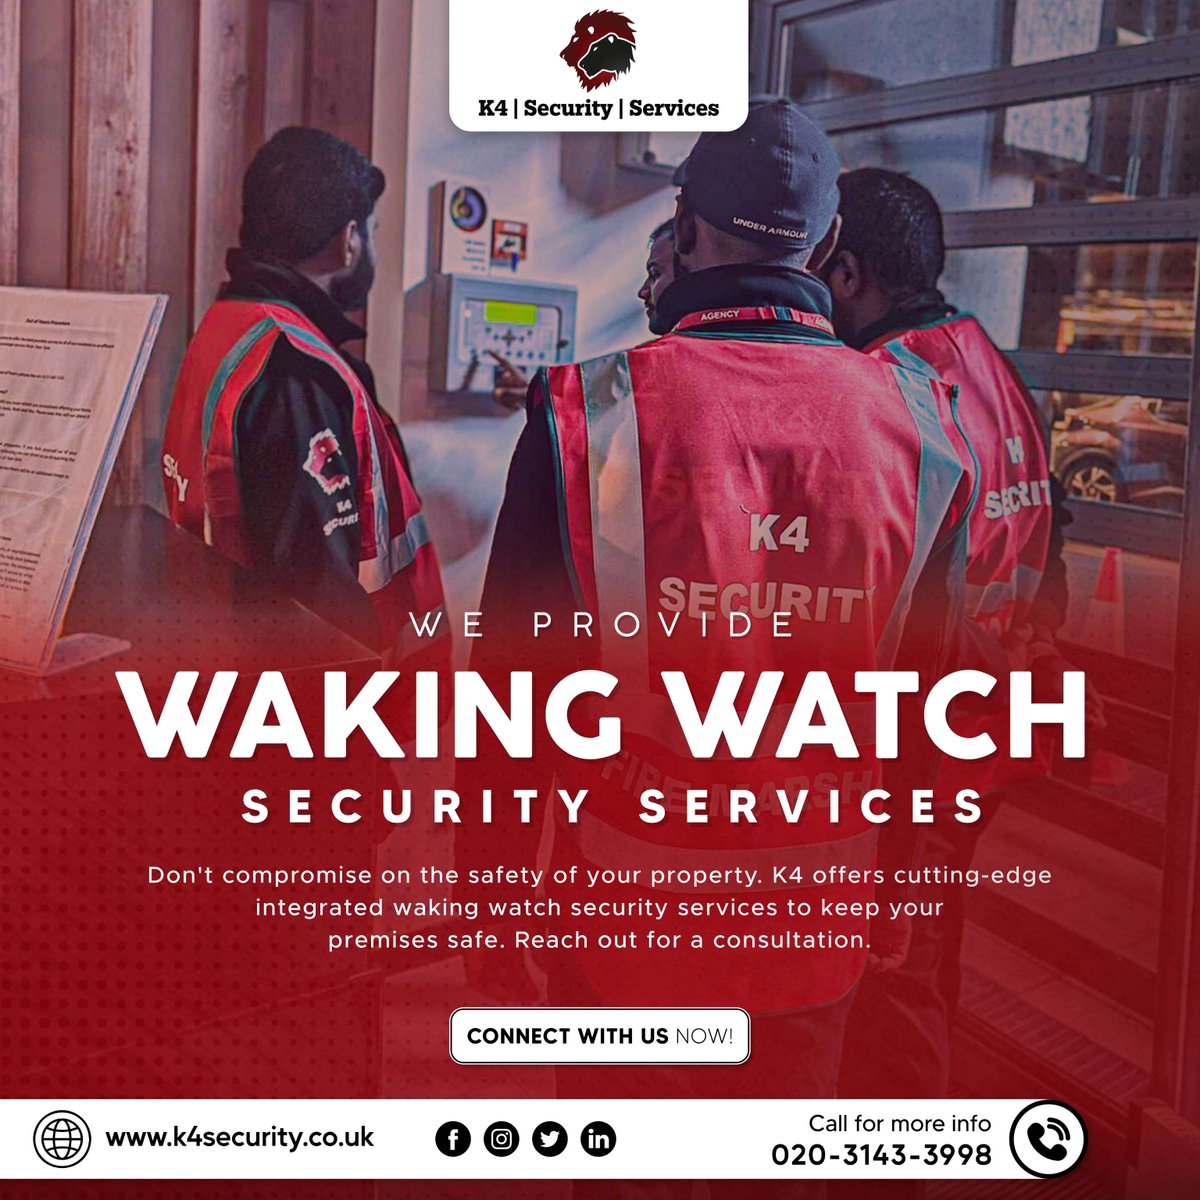 Choose K4 for a waking watch service that goes beyond expectations. Contact us today for a tailored solution to meet your security needs. 02031433998
 
k4security.co.uk/waking-watch-s…

#K4Security #WakingWatch #SafetyFirst #PropertySecurity #UK